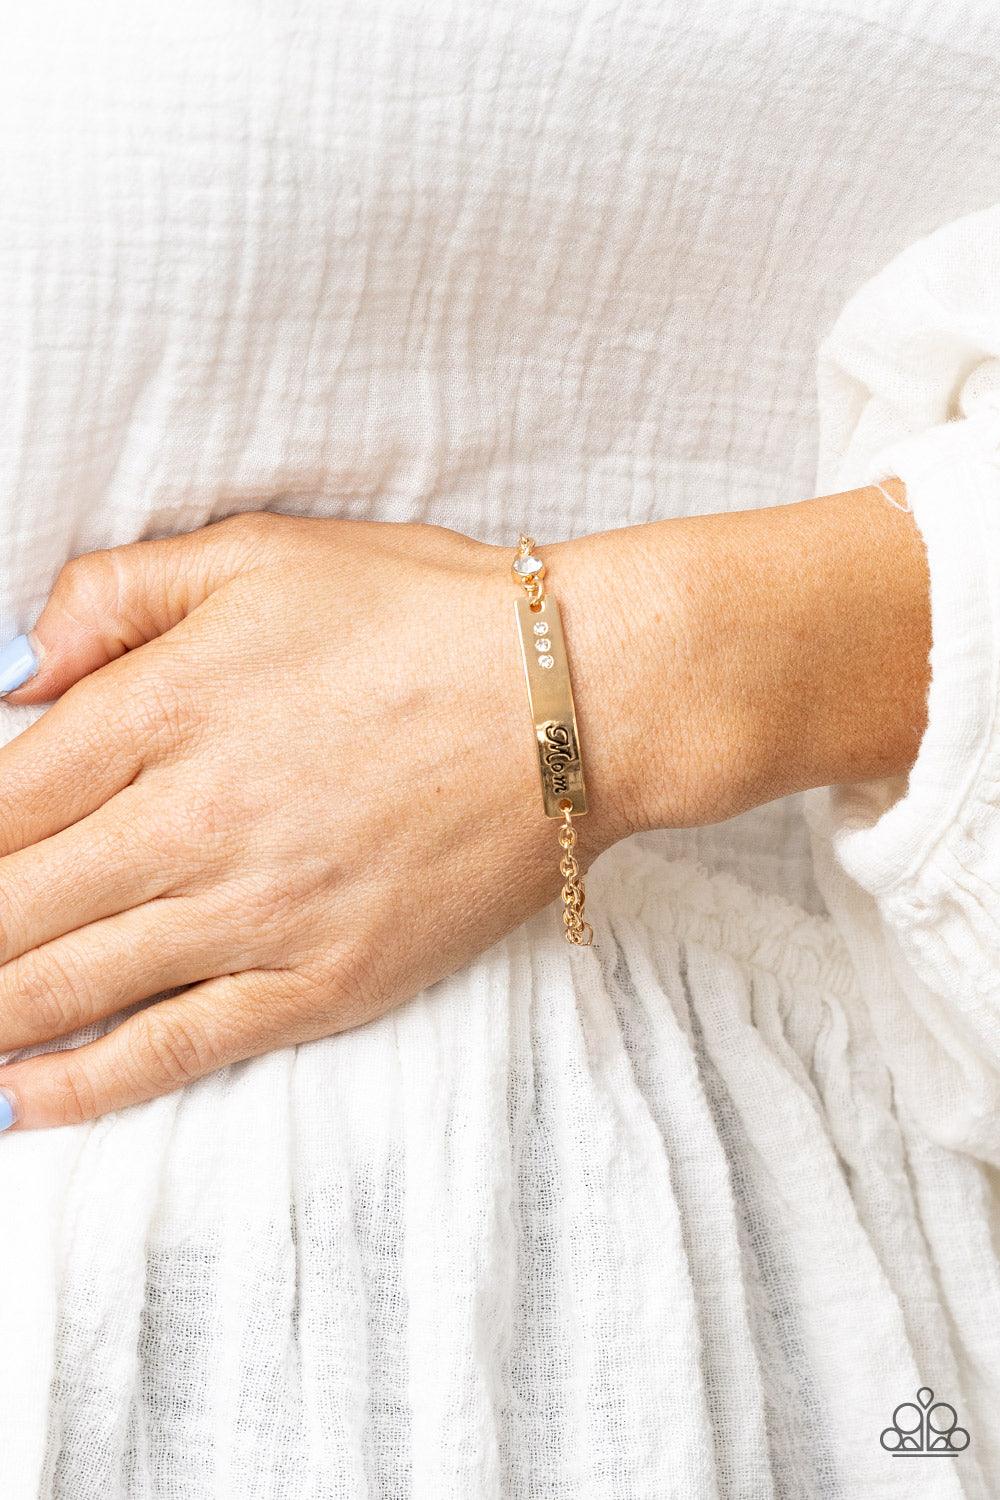 Paparazzi Accessories Mom Always Knows - Gold Infused with a glittery white rhinestone charm, a curved gold plate is dotted in dainty white rhinestones and stamped in the word, "Mom," as it delicately attaches to a dainty gold chain around the wrist for a